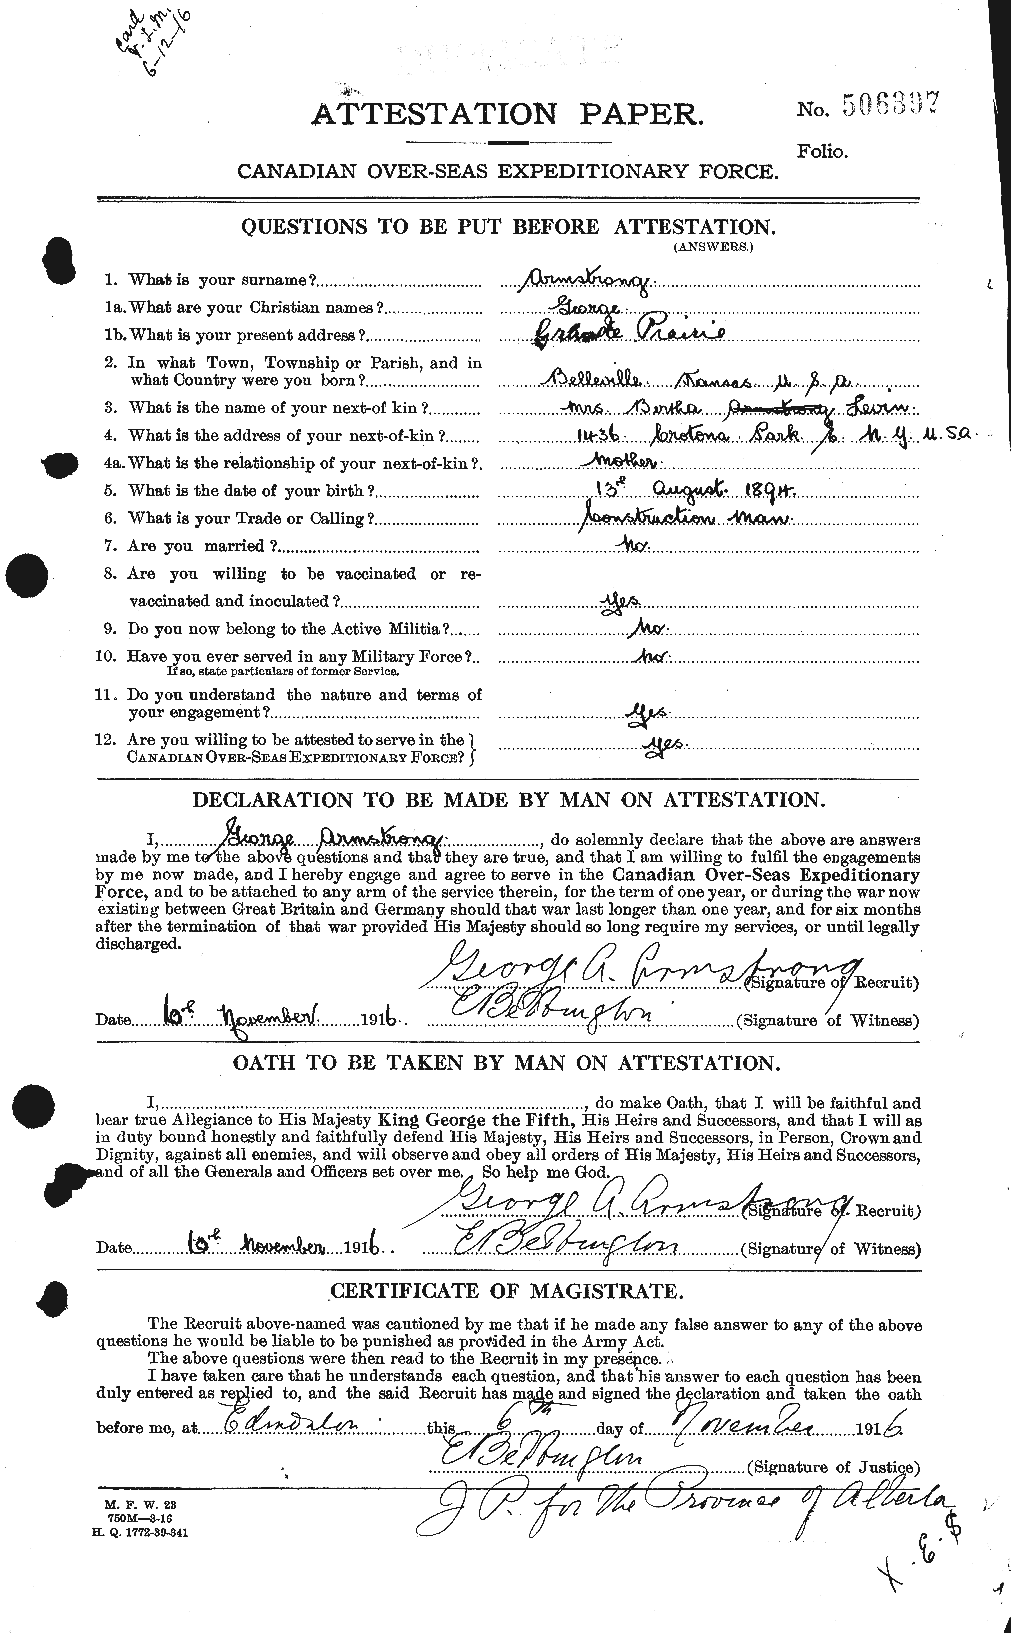 Personnel Records of the First World War - CEF 213737a